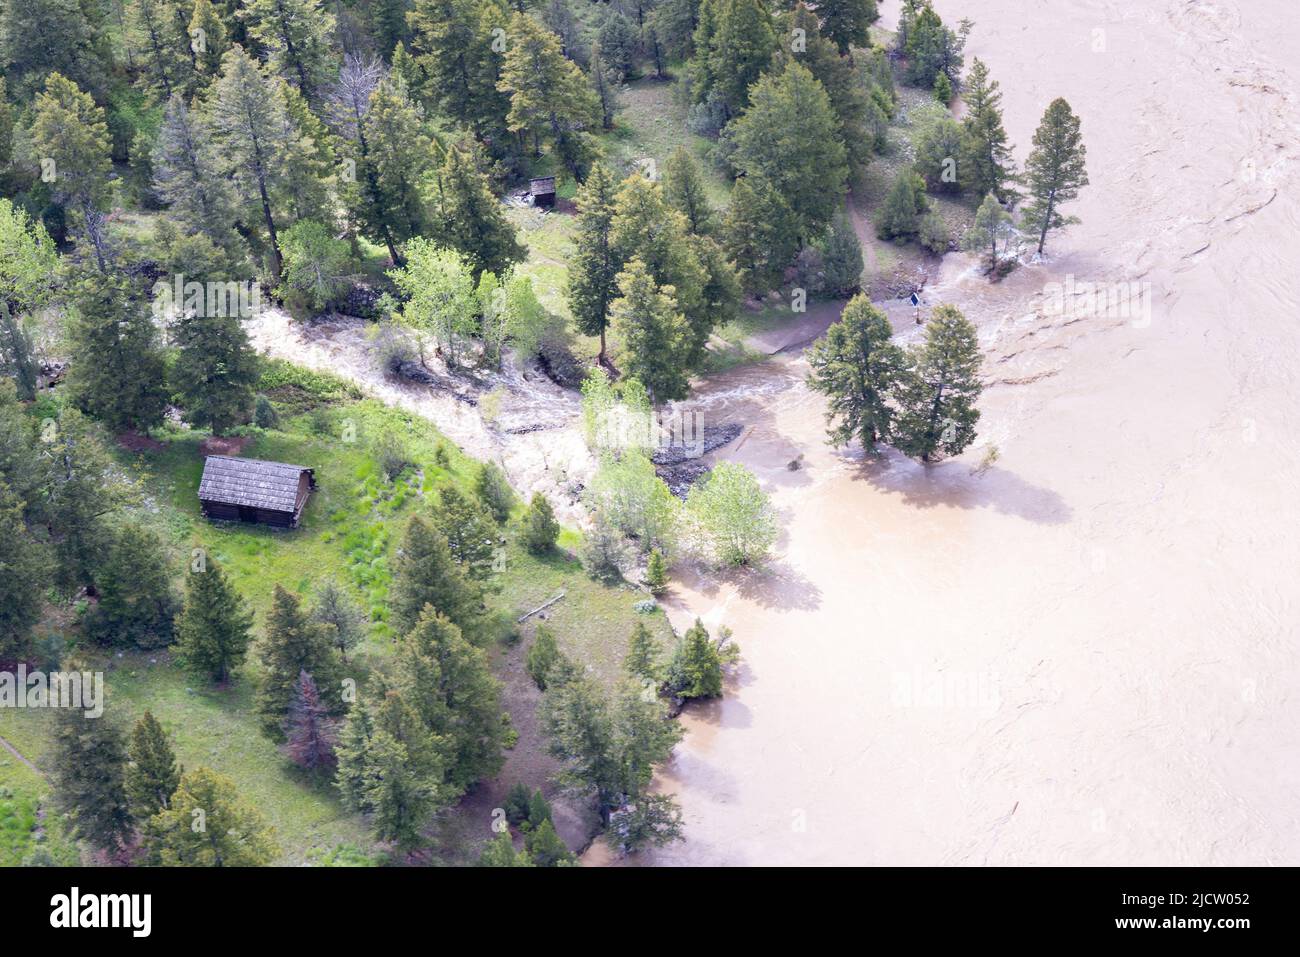 Yellowstone, United States. 13th June, 2022. The Lower Blacktail Patrol Cabin is washed away into the Yellowstone River after record rains and snow melt caused destructive floods closing Yellowstone National Park at the start of the busy season, June 13, 2022 in Yellowstone, Montana. Credit: Jacob W. Frank/NPS Photo/Alamy Live News Stock Photo